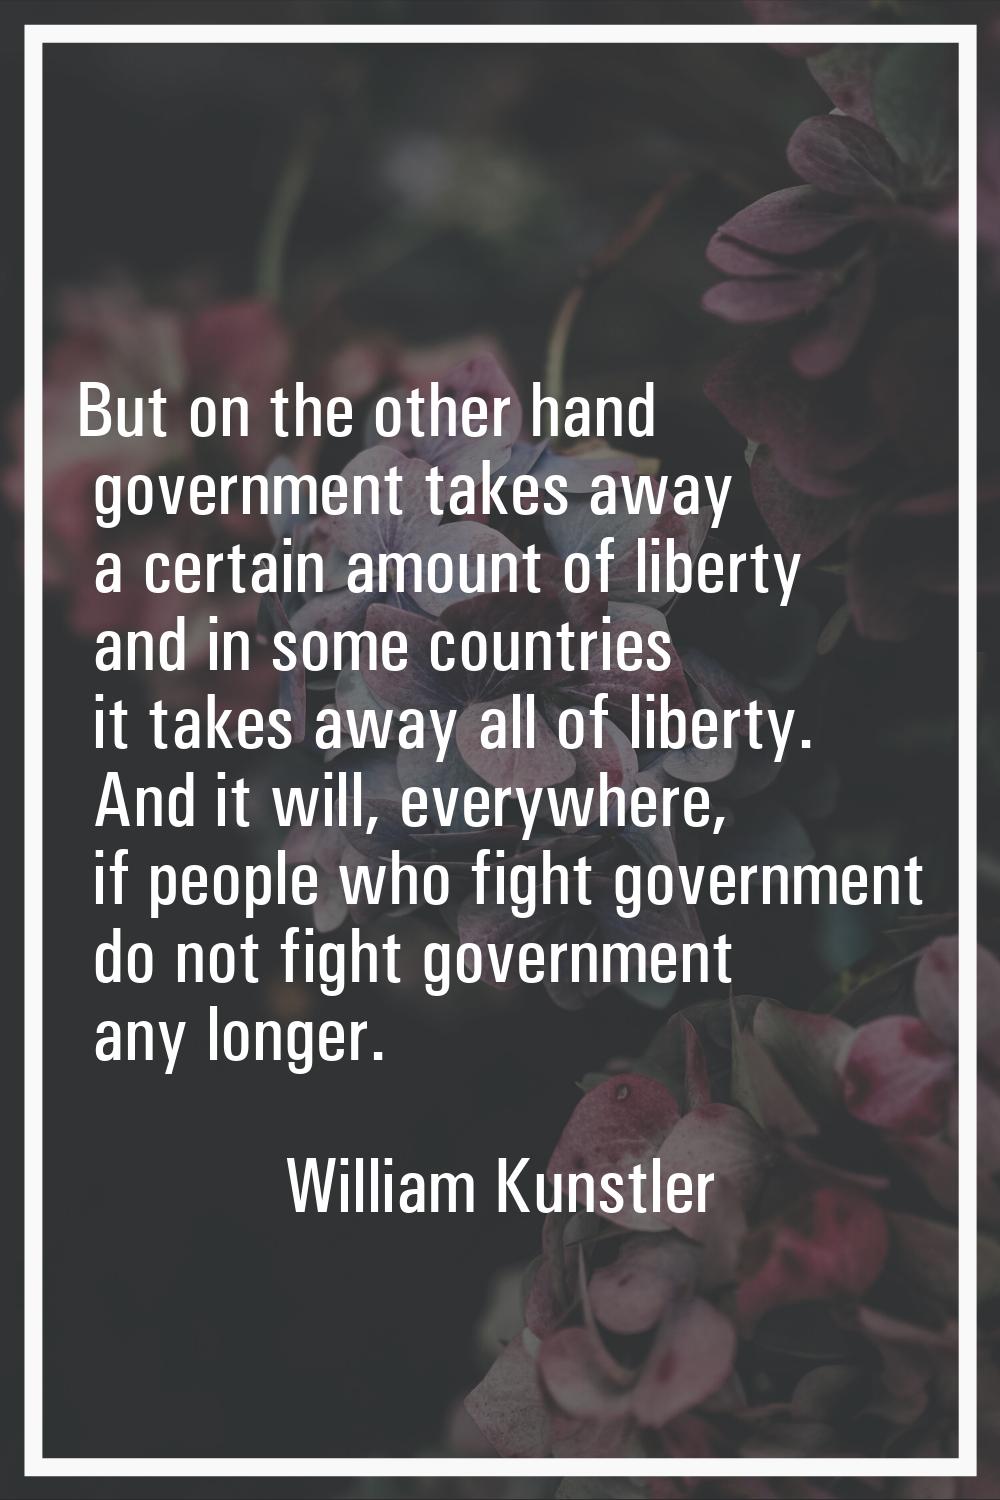 But on the other hand government takes away a certain amount of liberty and in some countries it ta